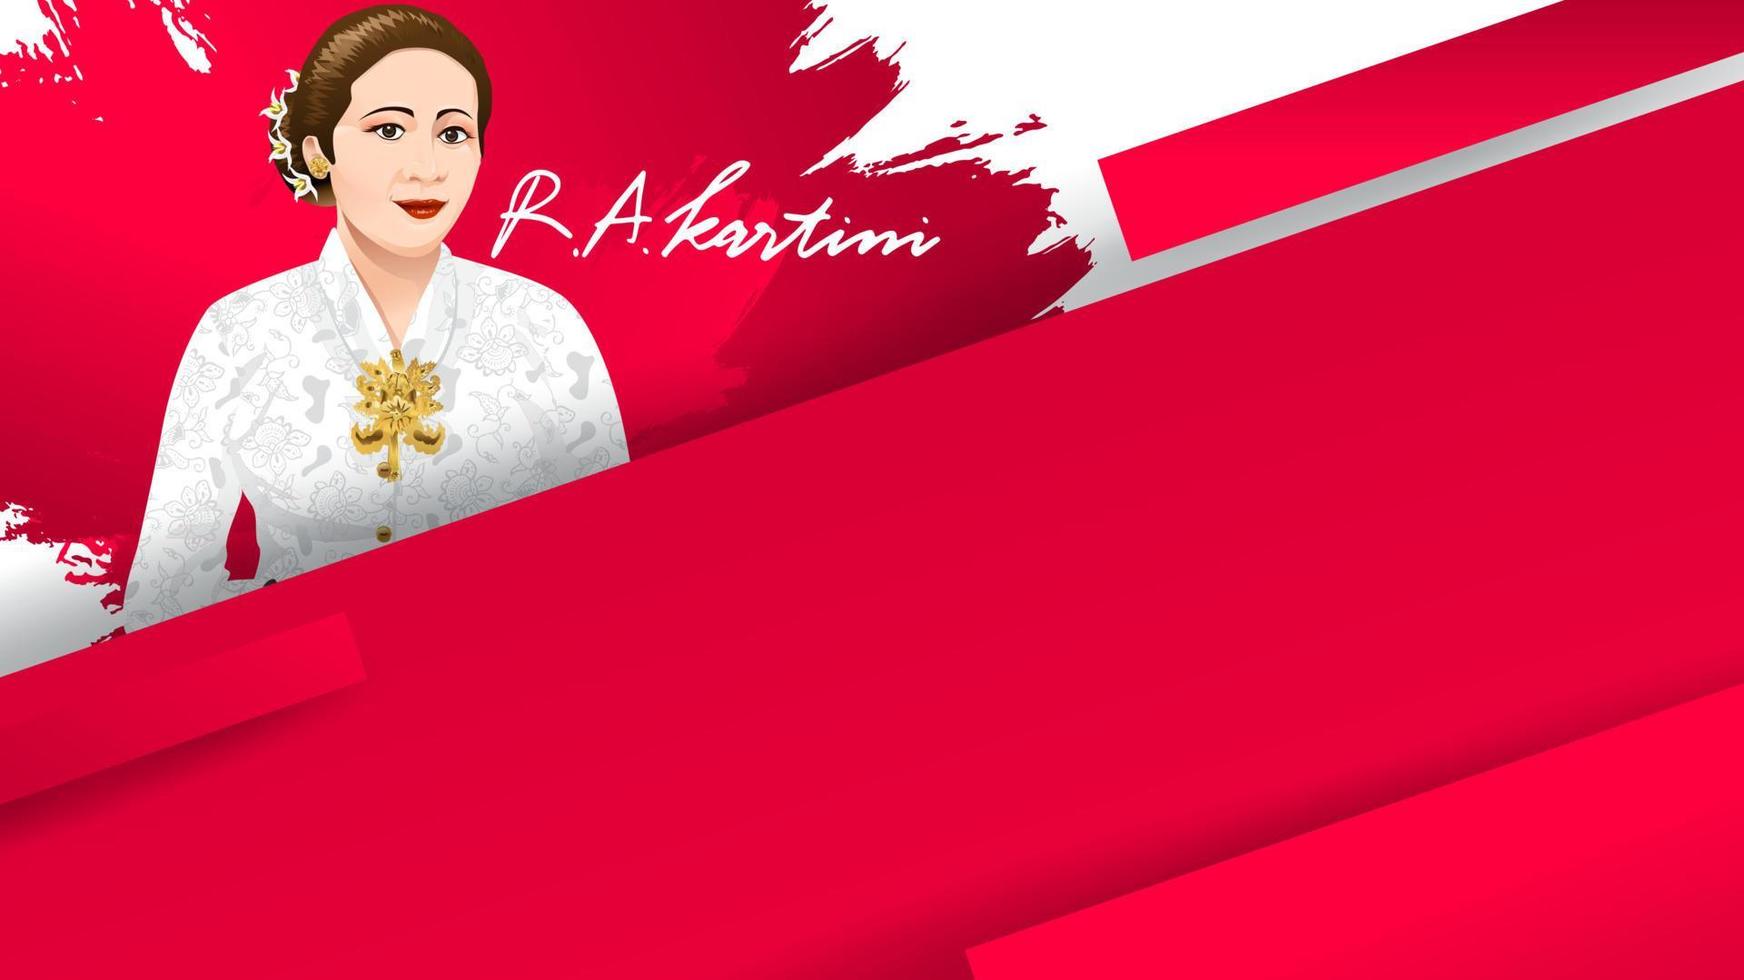 Kartini Day, R A Kartini the heroes of women and human right in Indonesia. banner template design background - Vector